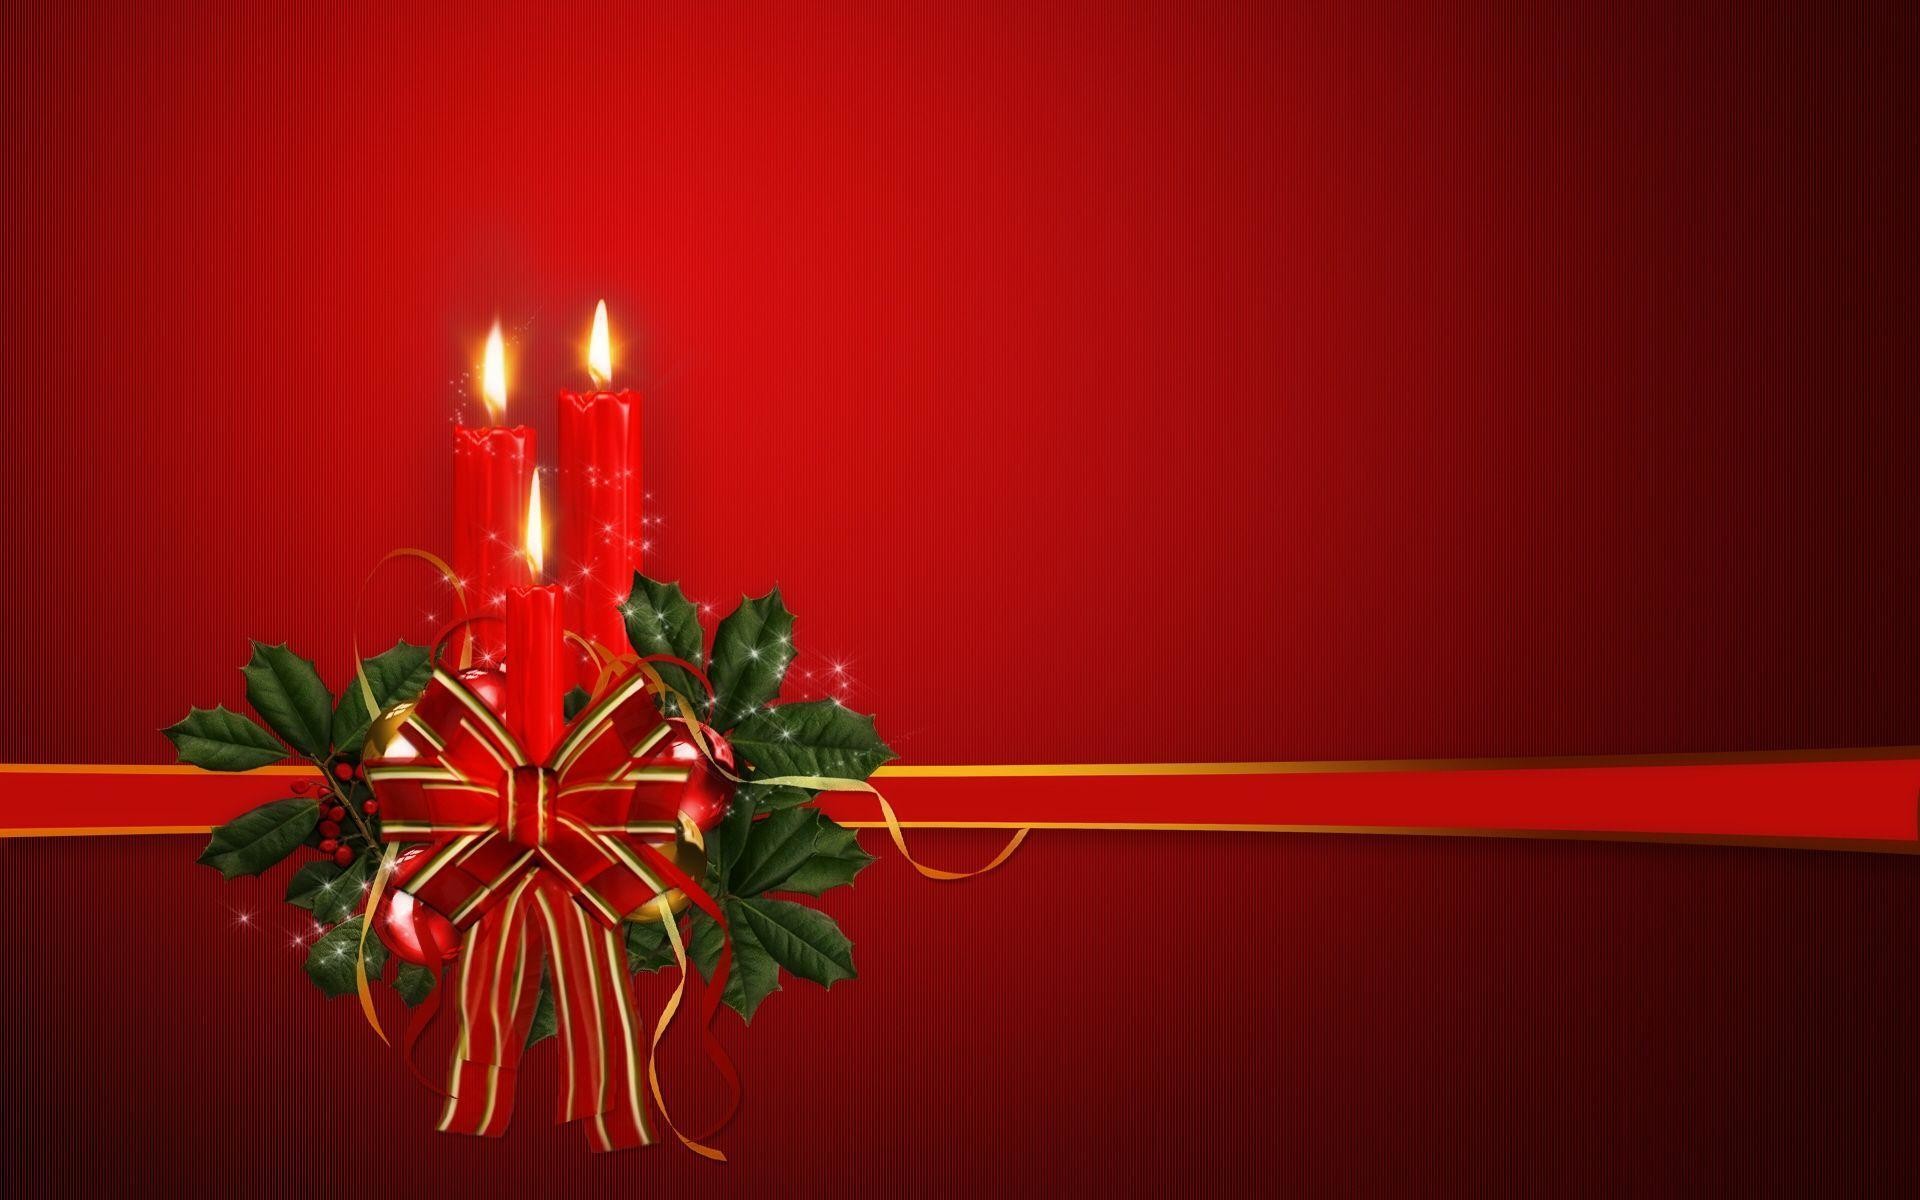 Christian Christmas Wallpapers Backgrounds Best Hd PX